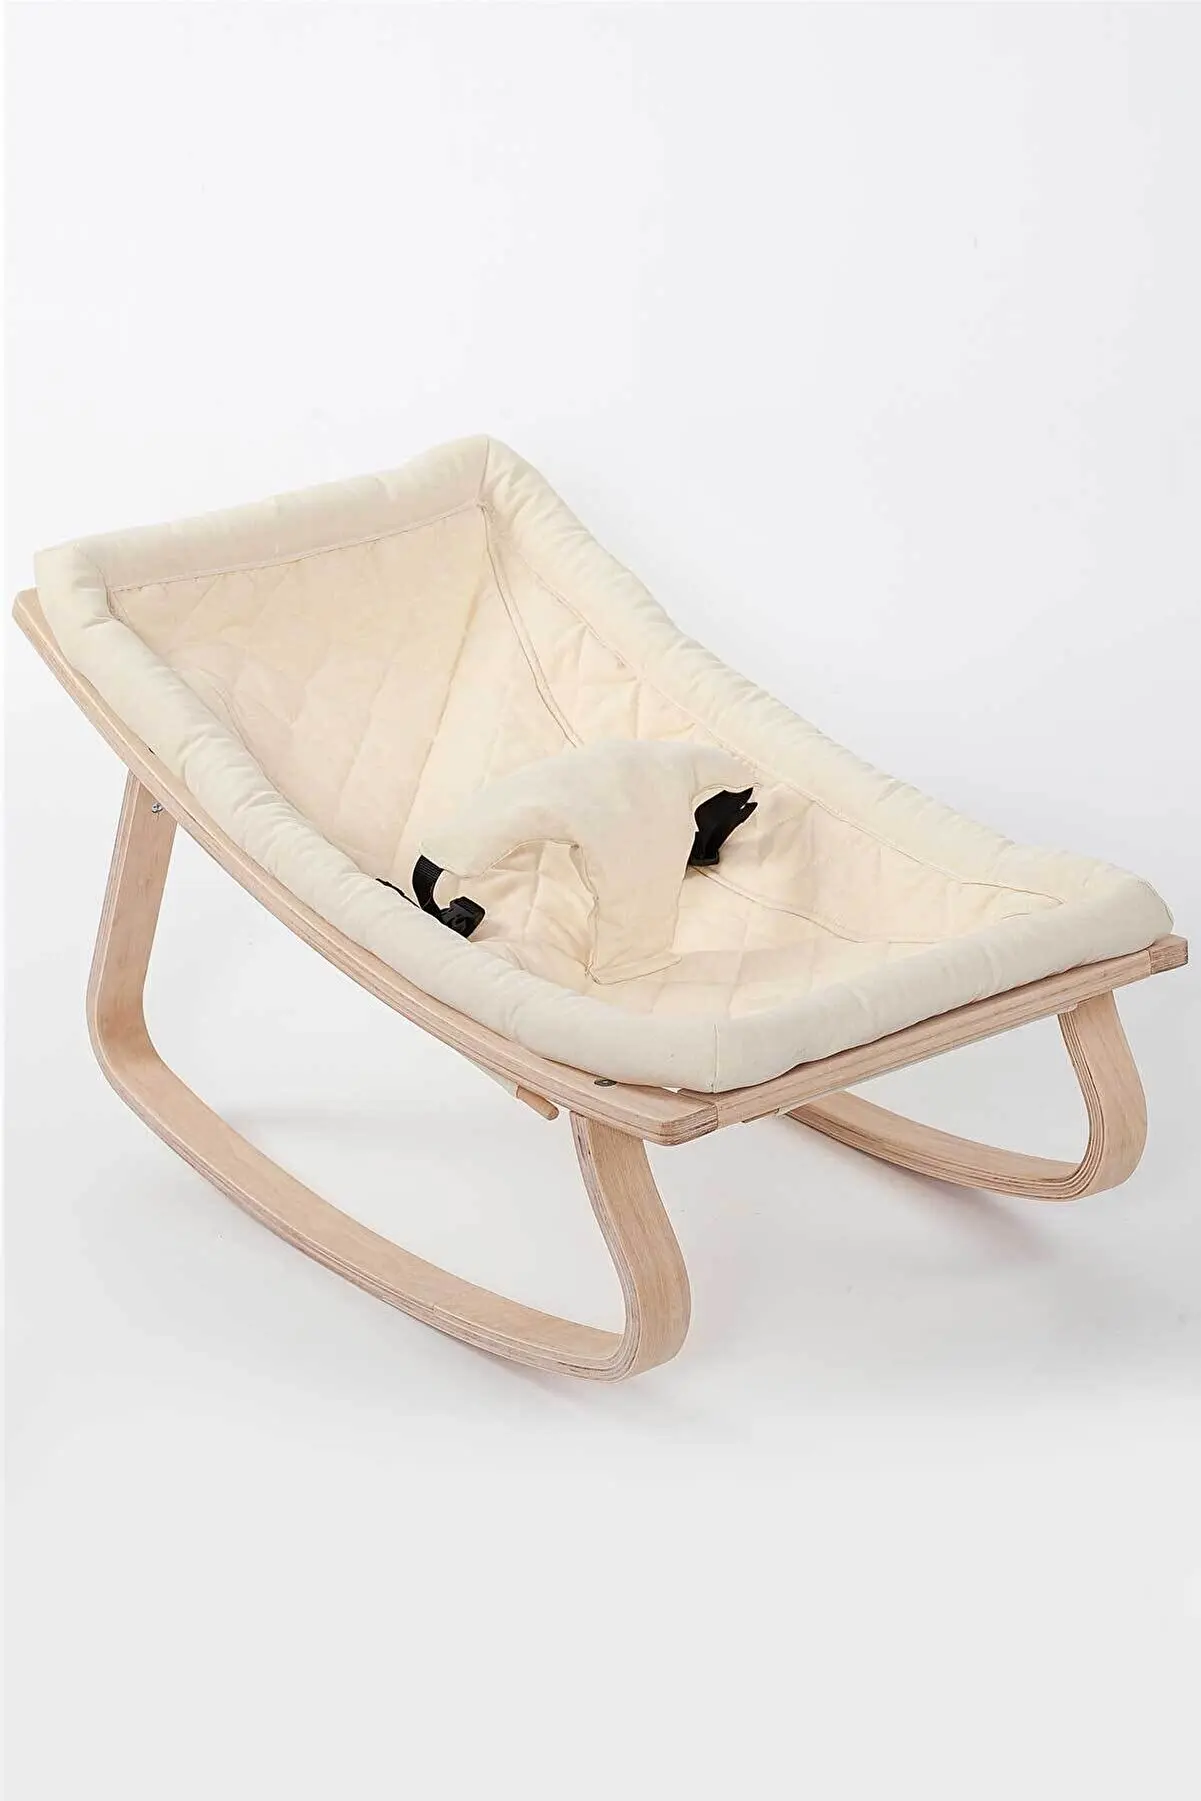 Natural Wooden Rocking Baby Cradle And Bed Rocking Chair Baby Furniture 0-36 Months Baby Swing With Arch Soother Cradle New Born